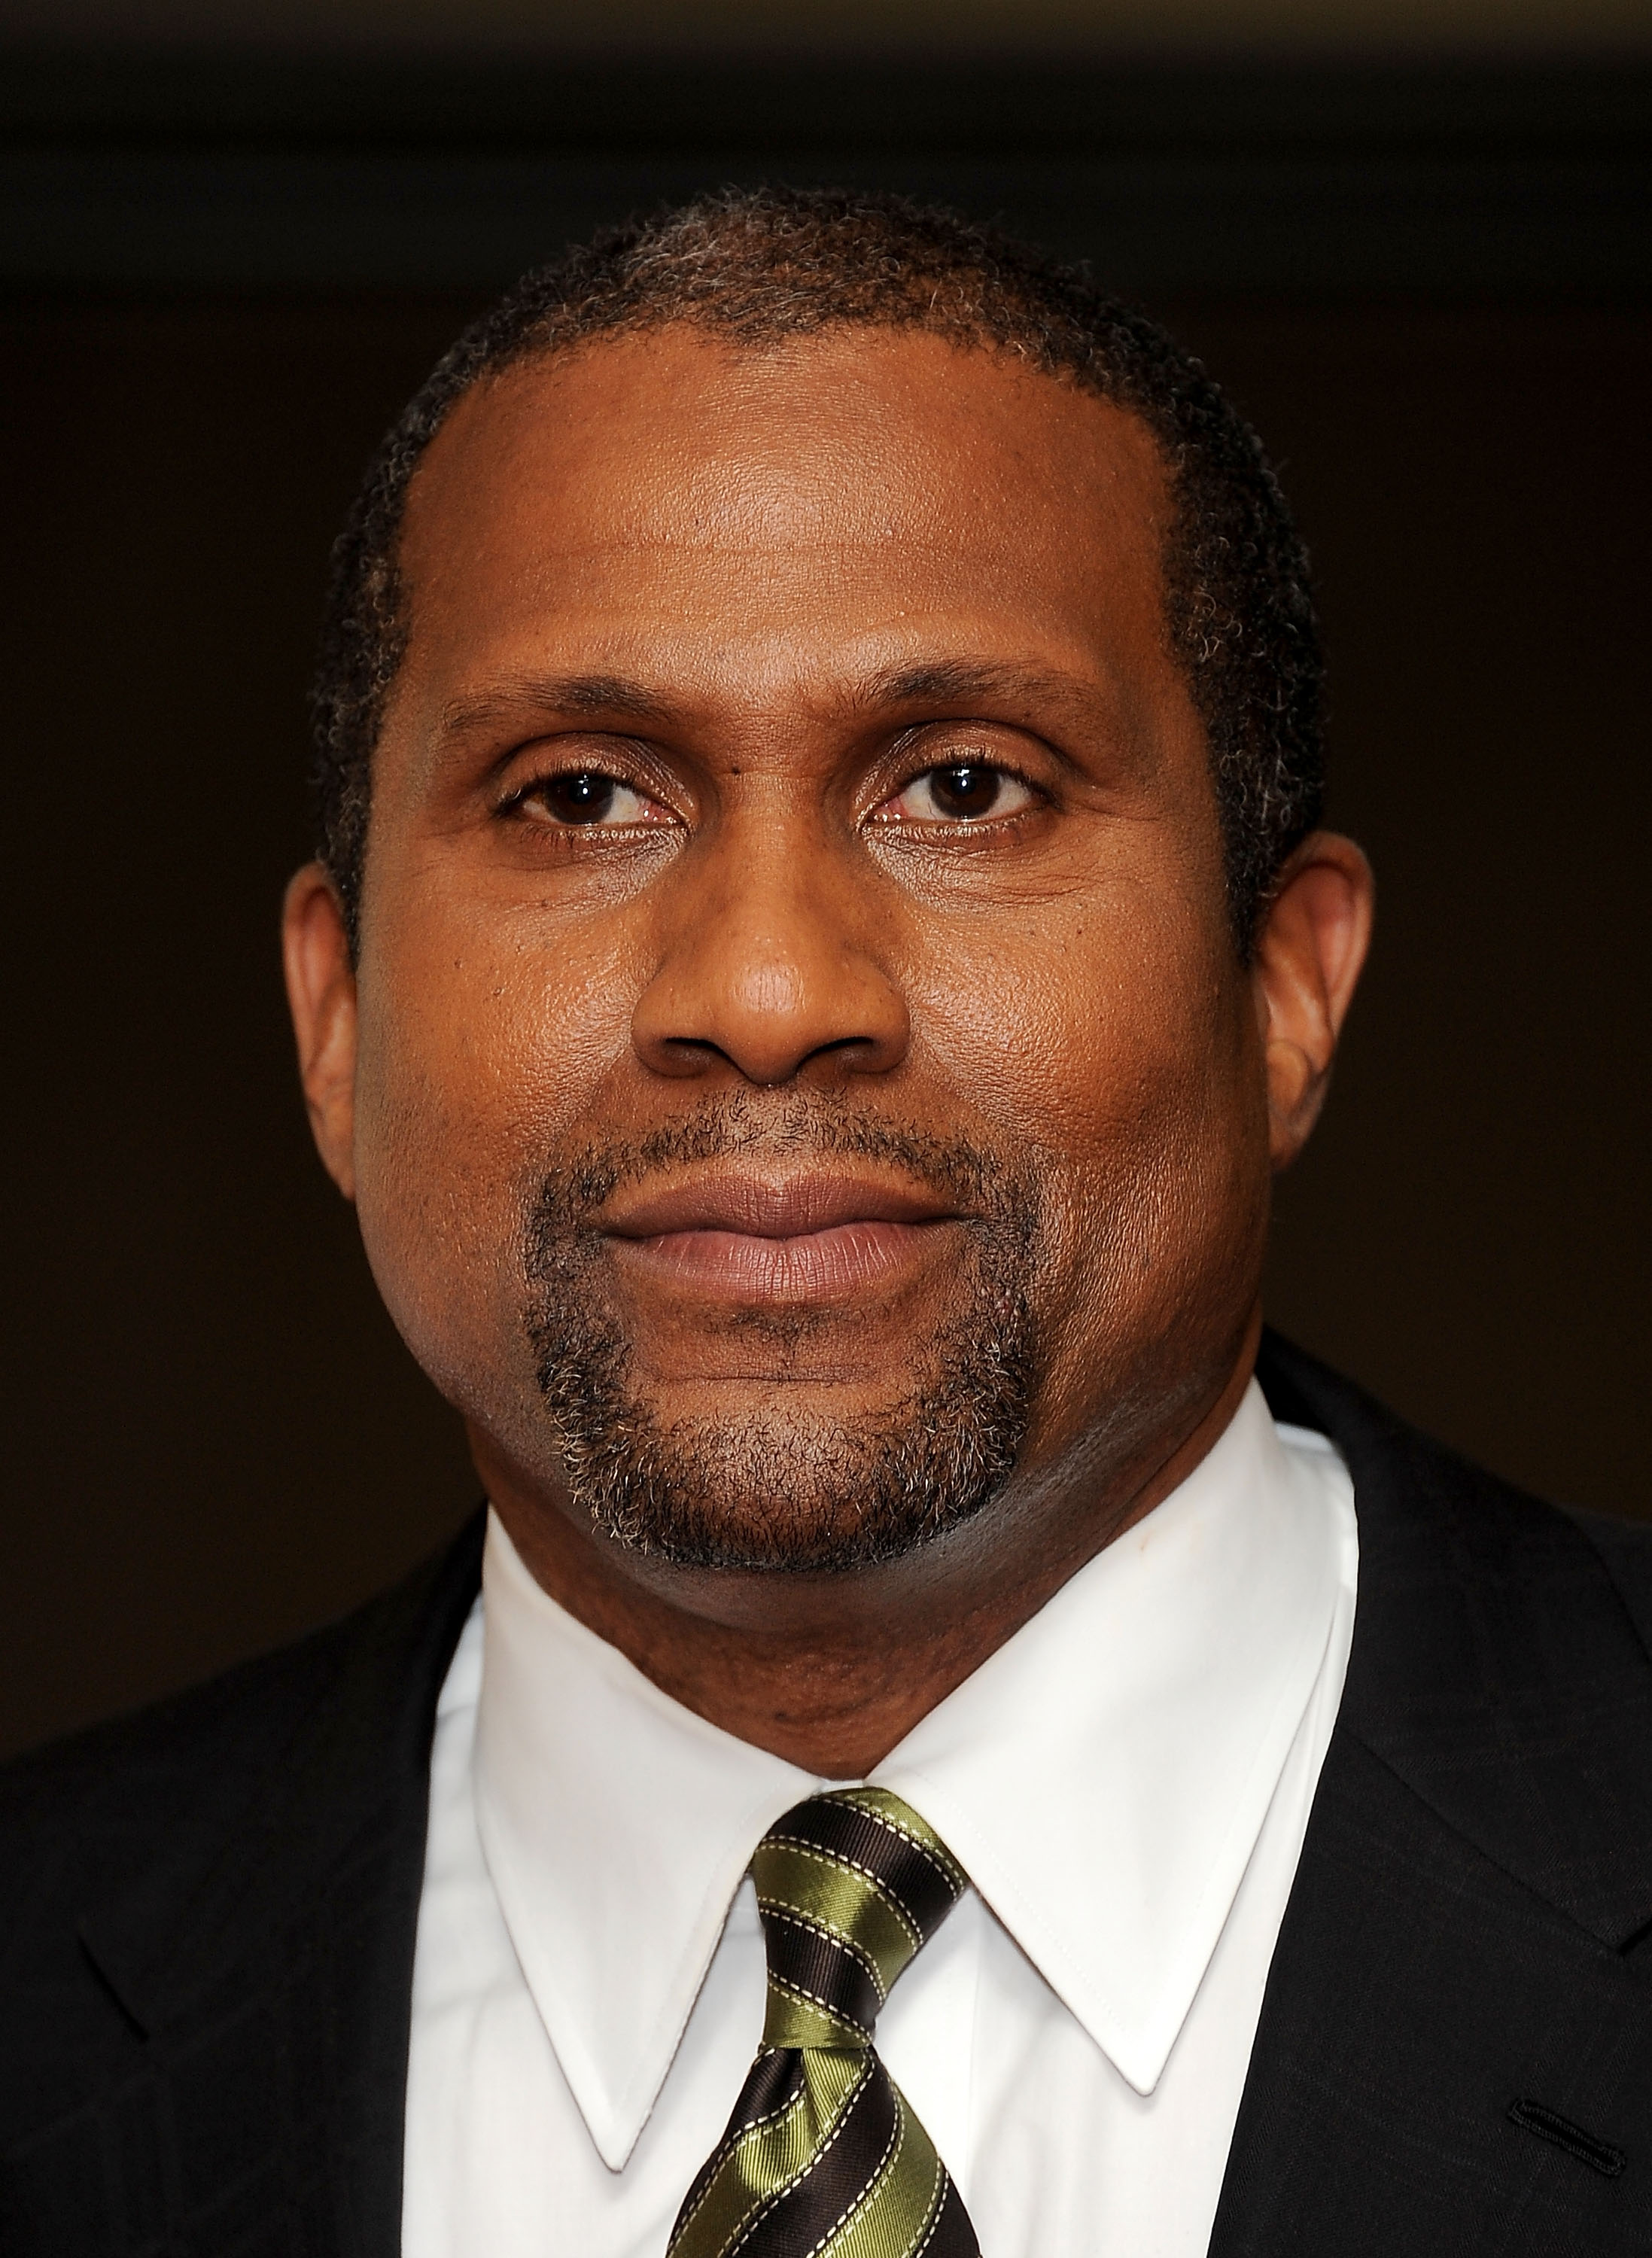 Talk show host Tavis Smiley attends The Academy Of Motion Picture Arts And Sciences Presents The 50th Anniversary Screening Of "To Kill A Mockingbird" at AMPAS Samuel Goldwyn Theater on April 11, 2012 in Beverly Hills, California. (Valerie Macon/Getty Images)